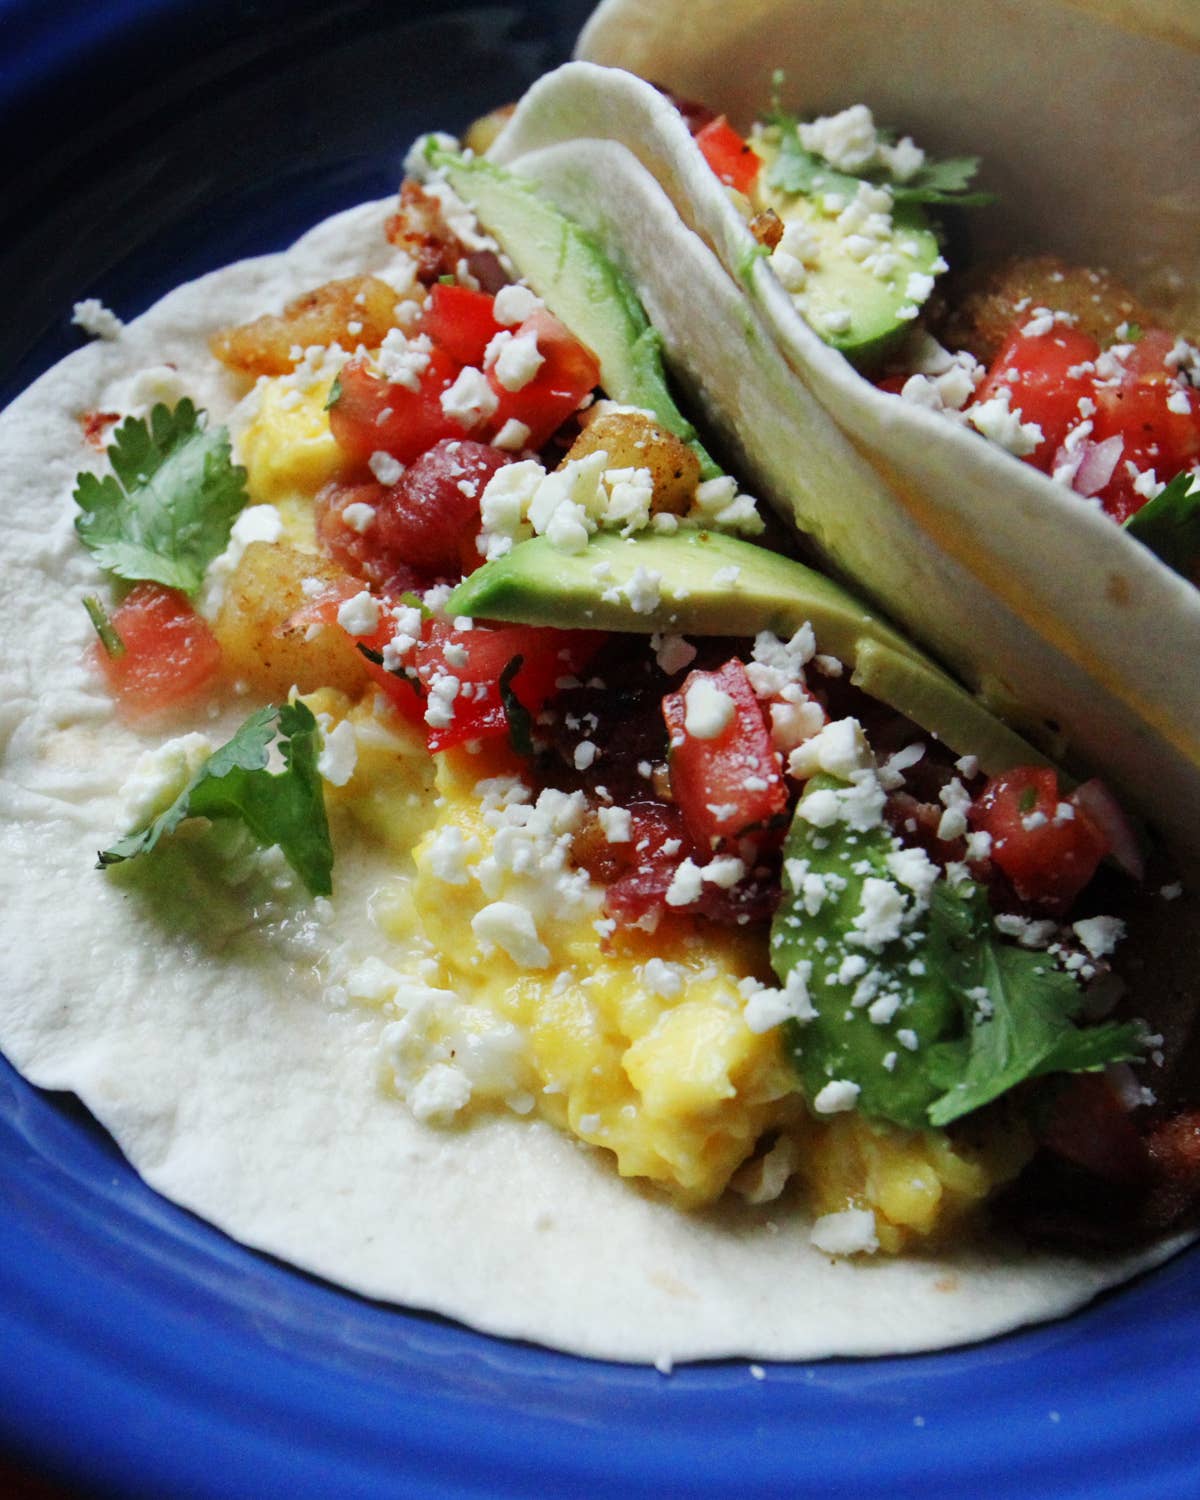 How to Make Your Own Breakfast Tacos